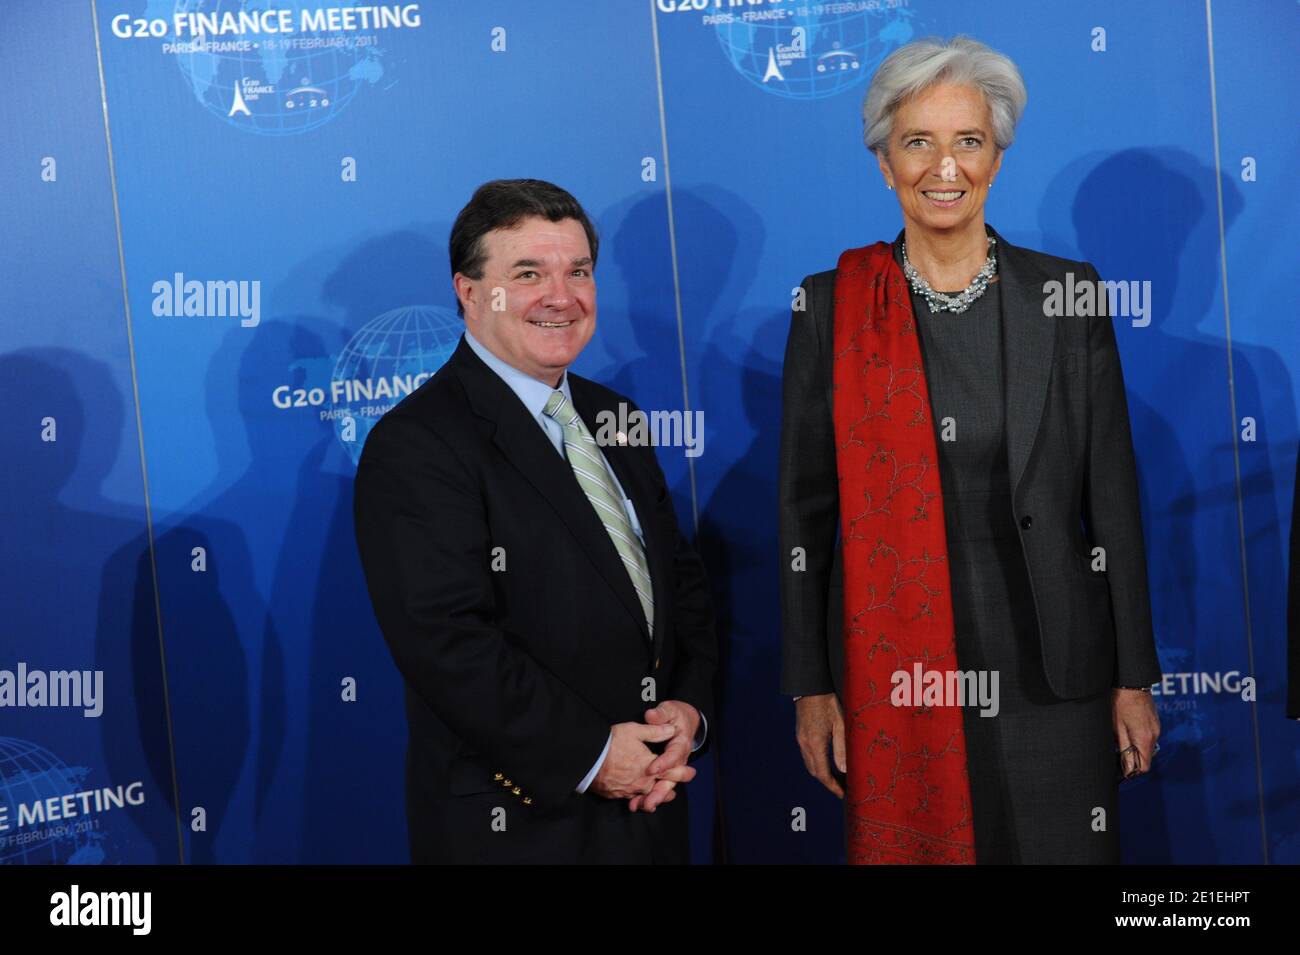 Canadian Finance Minister Jim Flaherty French Minister for the Economy, Finance and Industry Christine Lagarde pose as he arrives at the opening session of the G20 Finance summit at the Bercy Finance Ministry in Paris, France on February 19, 2011. Finance chiefs from the world's 20 industrialized and fastest developing nations wrestle over how to steady the world economy at a two-days meeting in Paris. Photo by Mousse/ABACAPRESS.COM Stock Photo